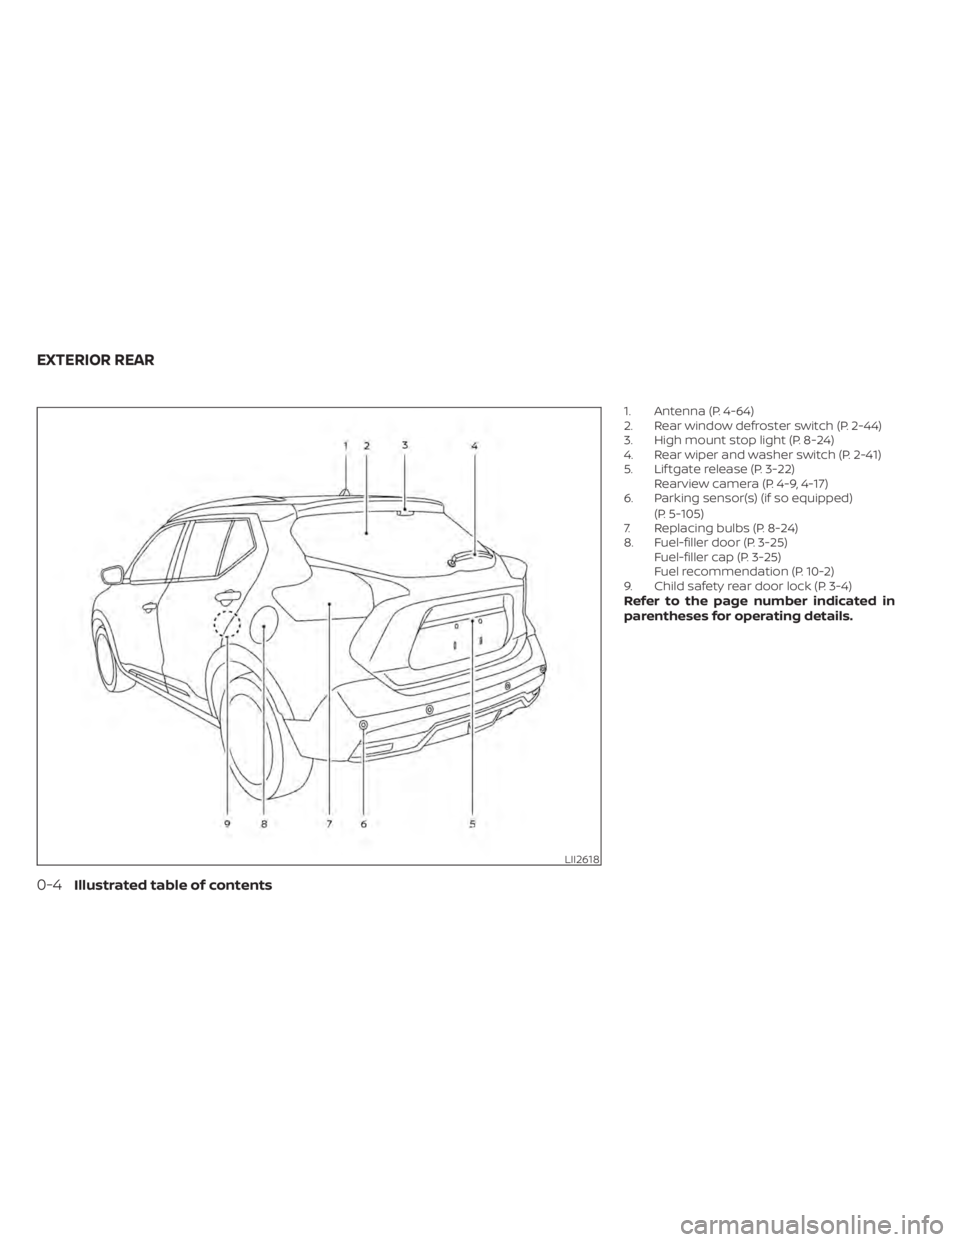 NISSAN KICKS 2021 User Guide 1. Antenna (P. 4-64)
2. Rear window defroster switch (P. 2-44)
3. High mount stop light (P. 8-24)
4. Rear wiper and washer switch (P. 2-41)
5. Lif tgate release (P. 3-22)Rearview camera (P. 4-9, 4-17)